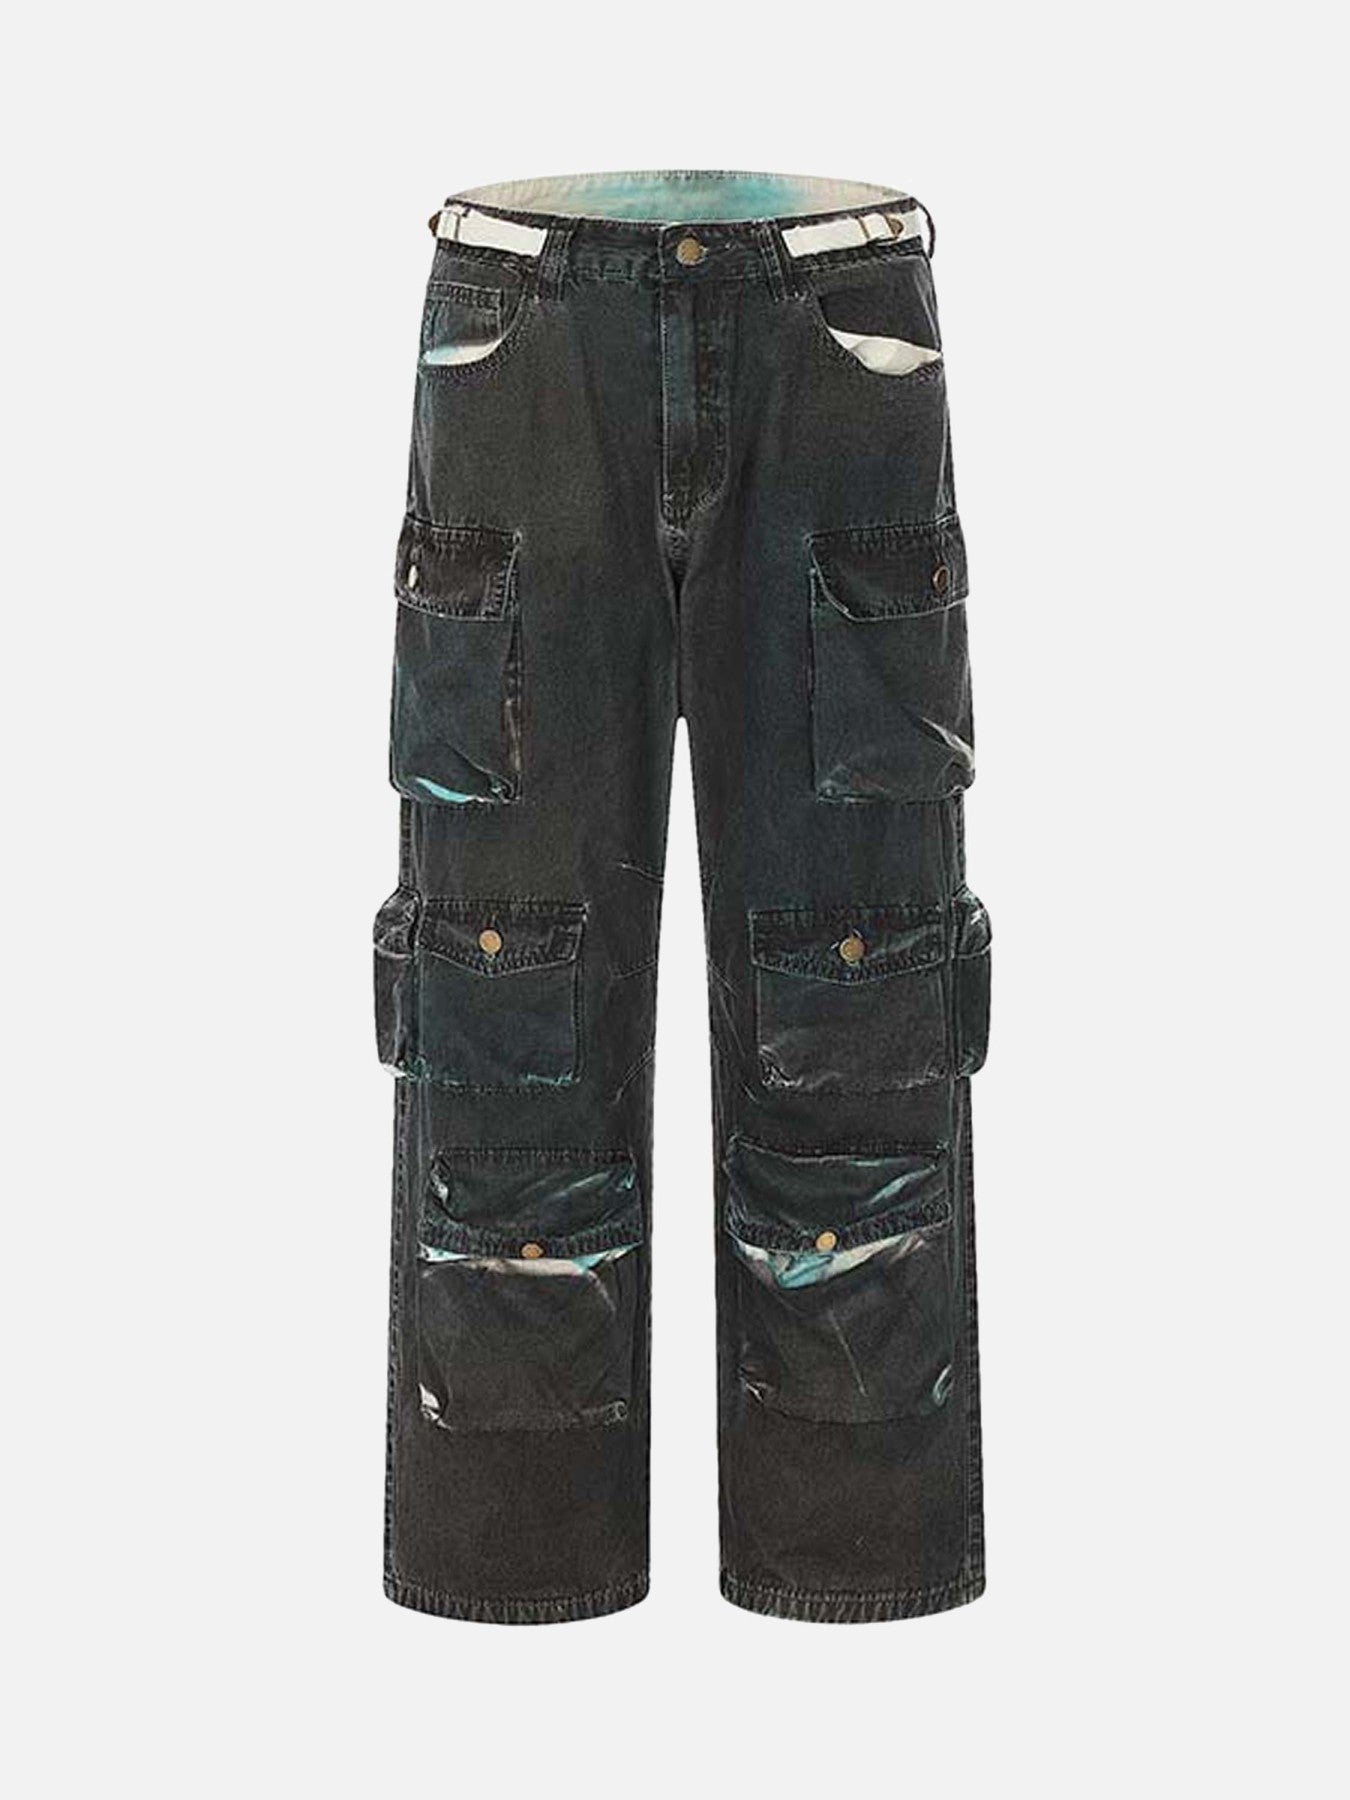 The Supermade Washed And Aged Tie-dye Multi-pocket Denim Work Pants